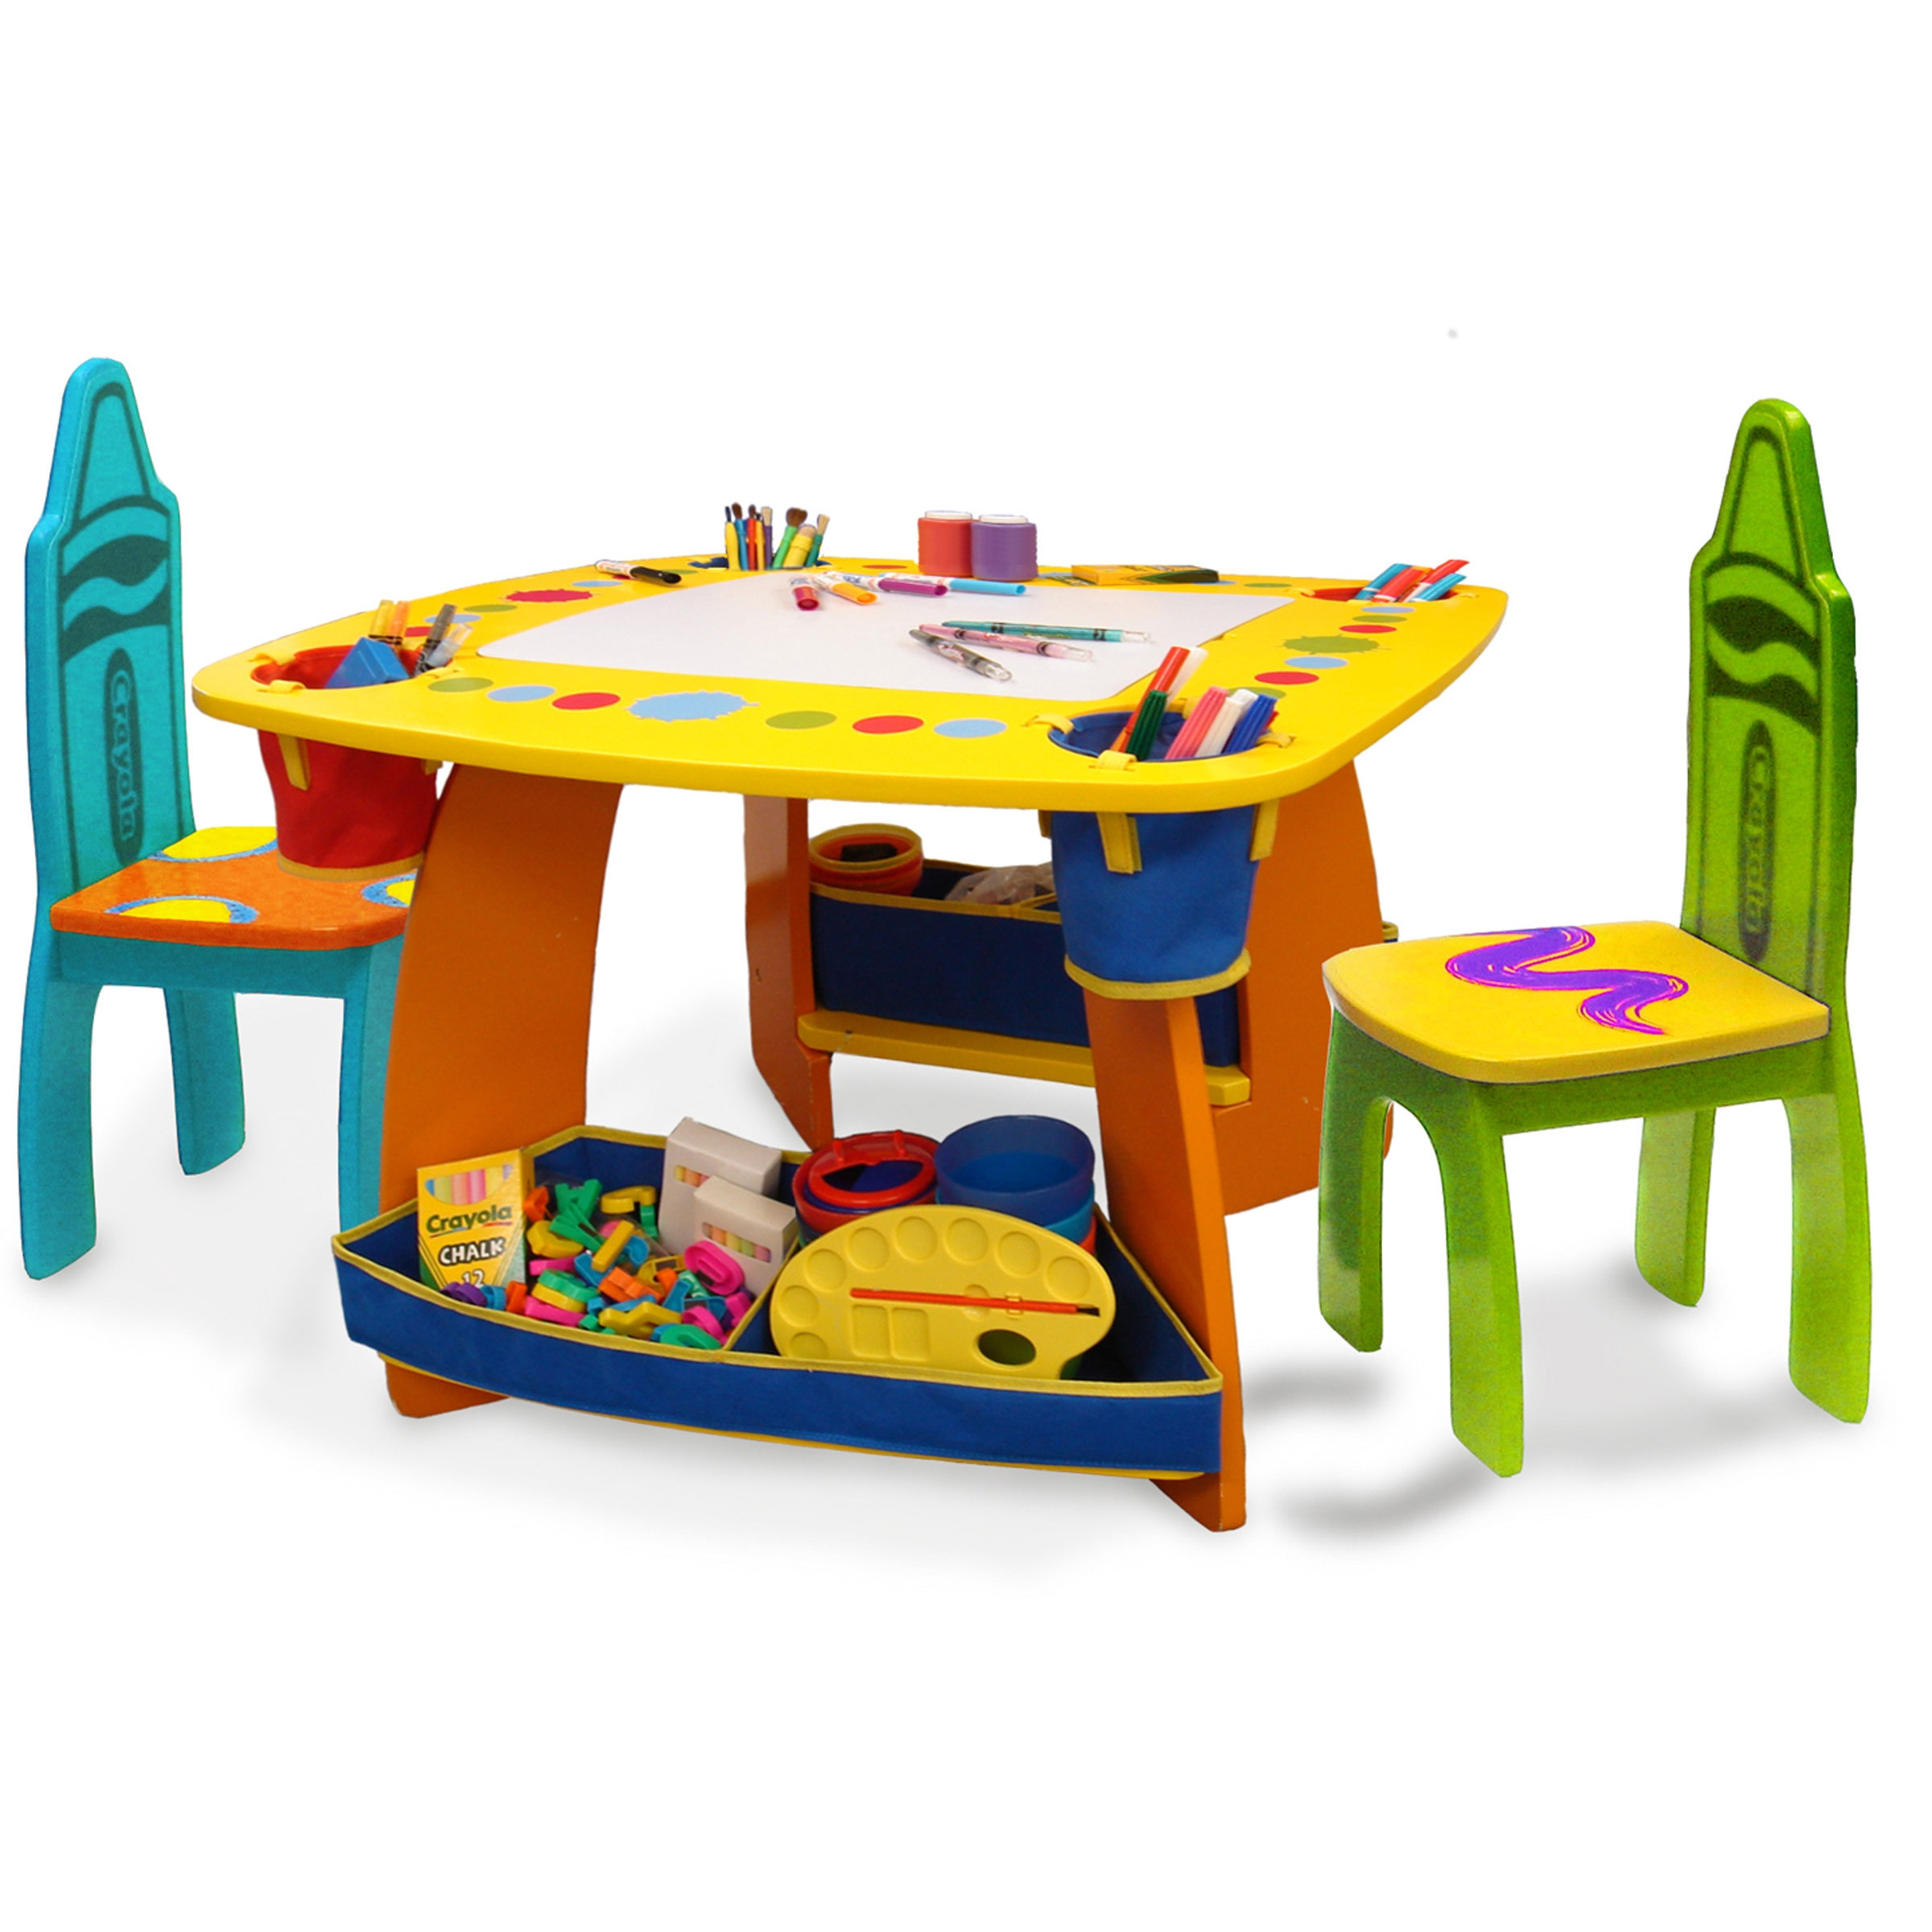 Chic Crayola Wooden Kids 3 Piece Table and Chair Set wooden toddler table and chairs